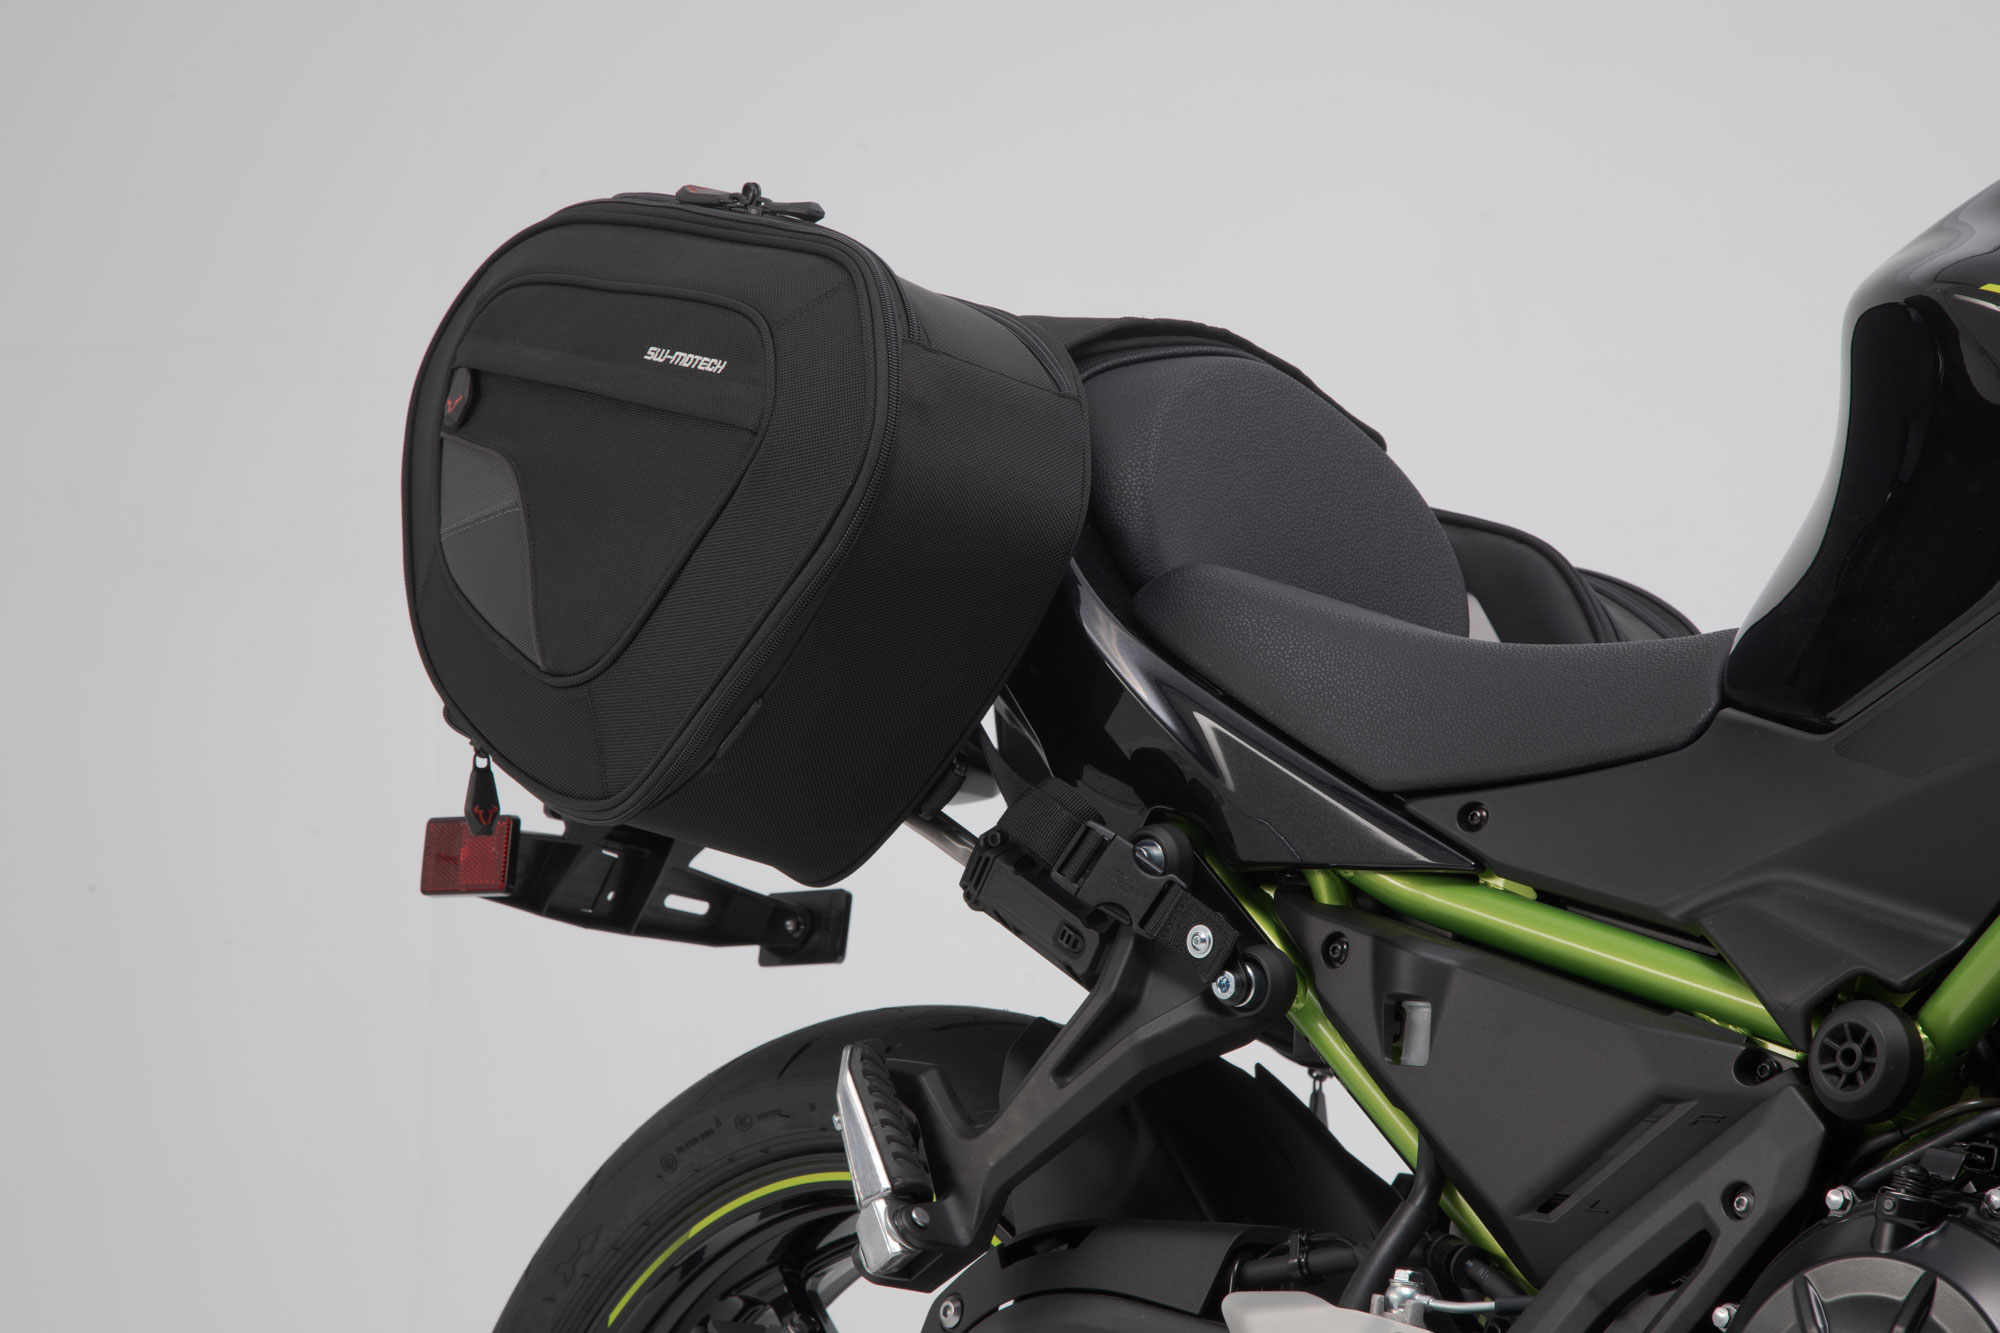 Accessories for the KAWASAKI Z 650 from SW-MOTECH